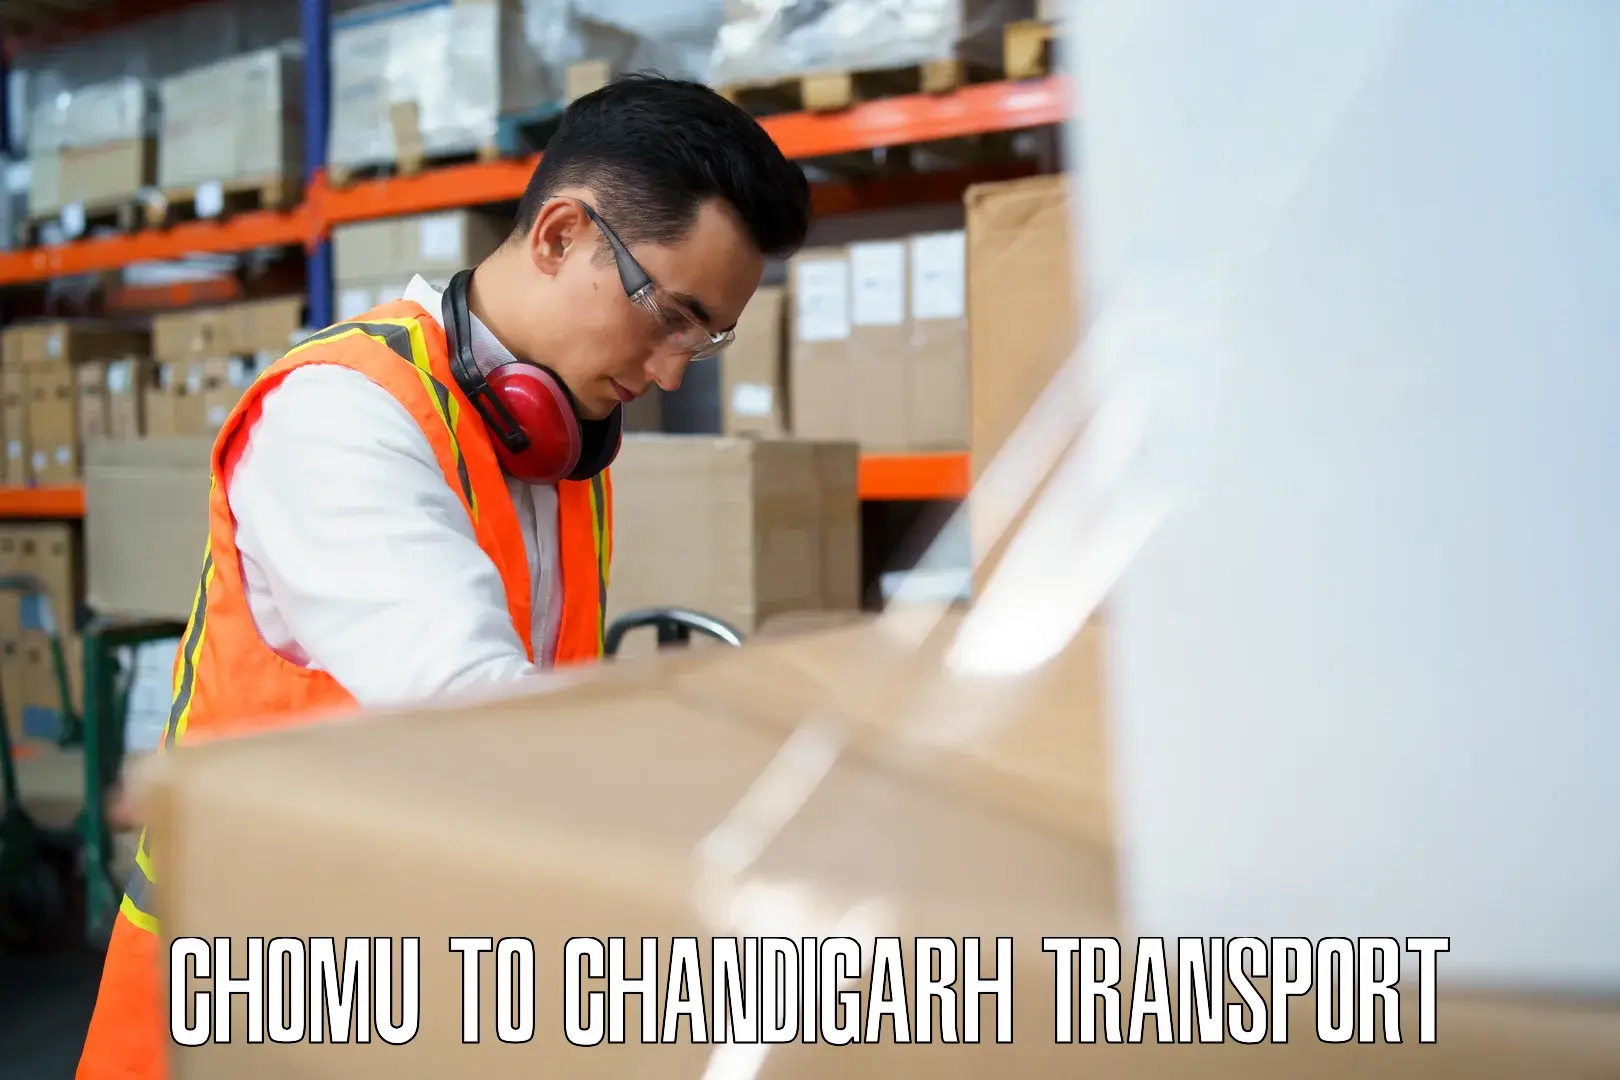 Two wheeler parcel service in Chomu to Chandigarh